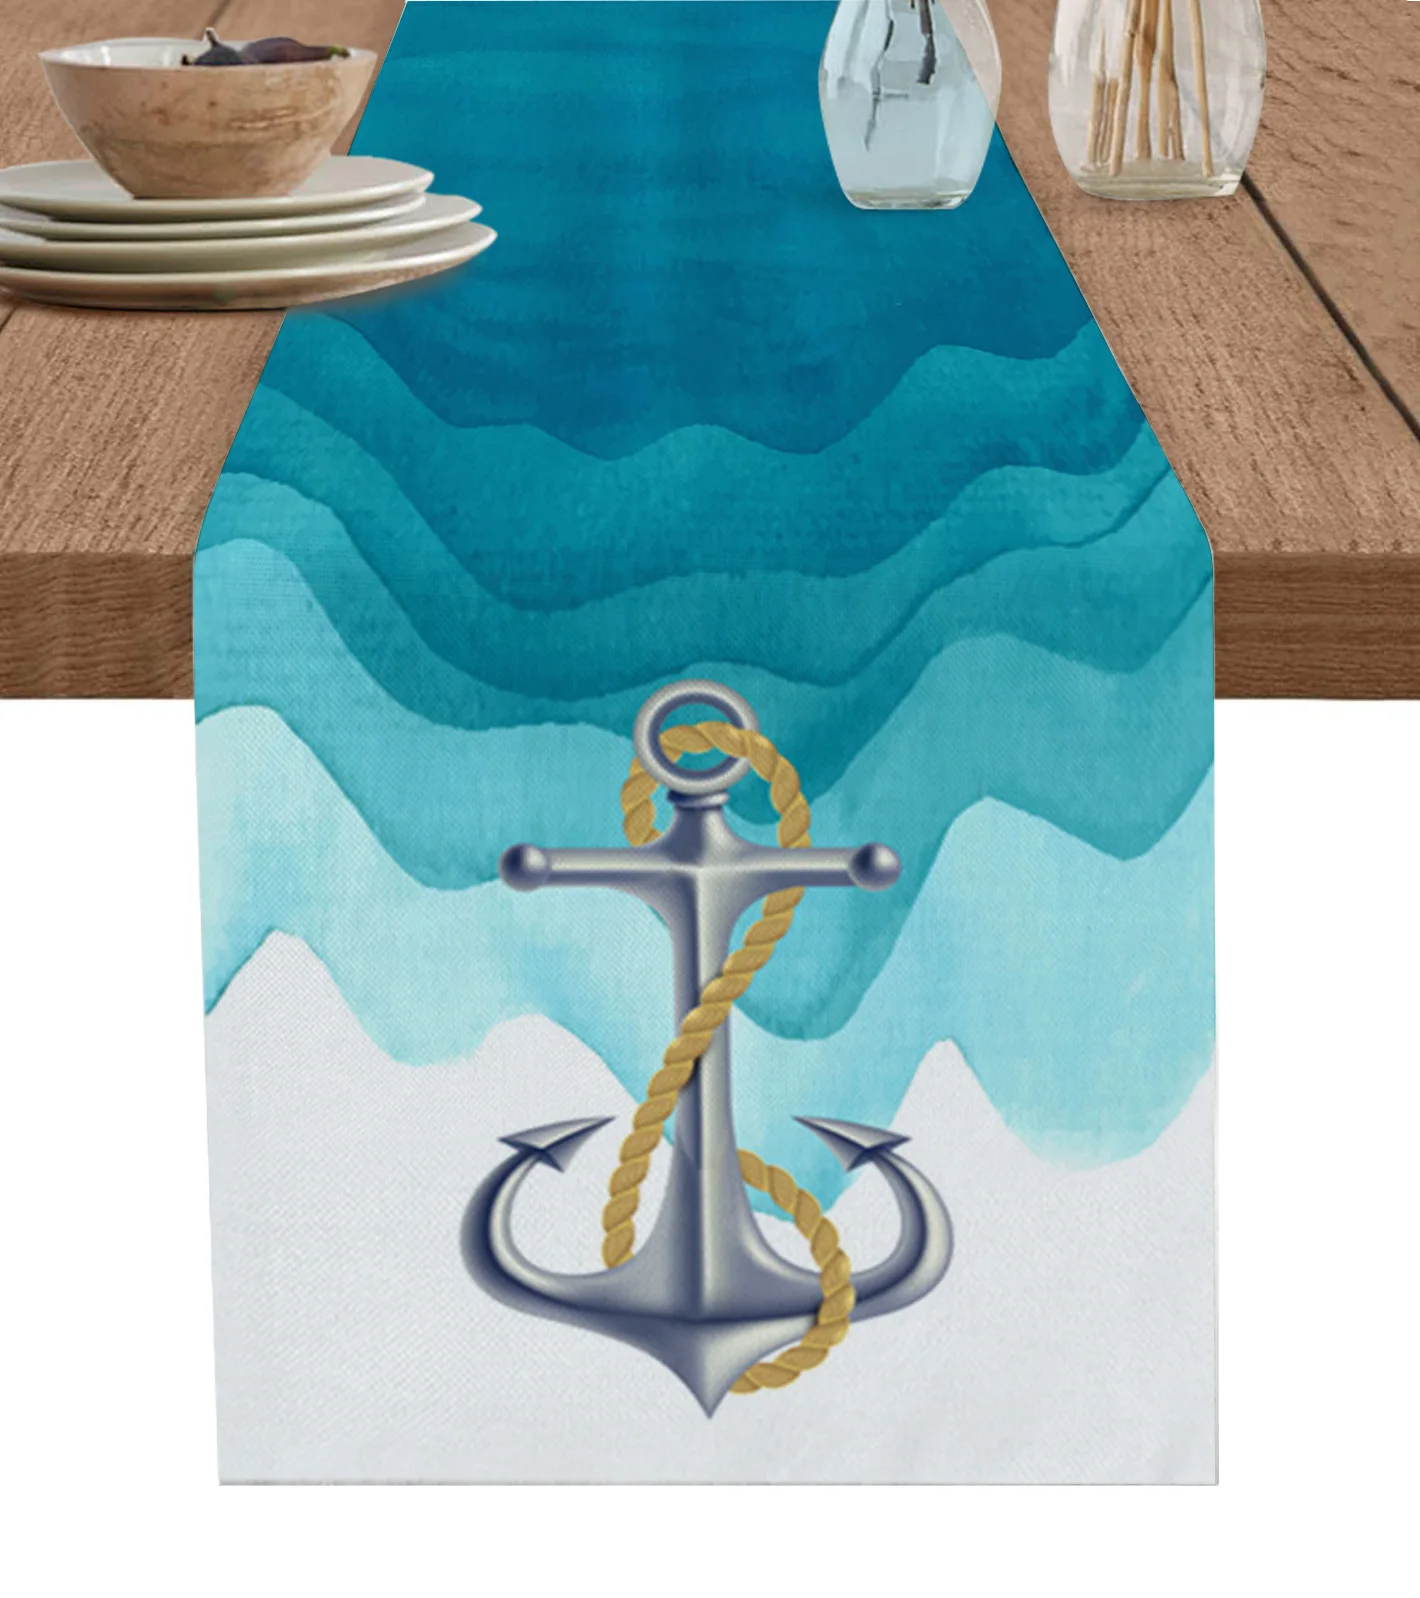 

Ocean Gradient Anchor Water Duck Green Table Runner for Dining Table Wedding Decor Tablecloth Home Party Decor Table Mats